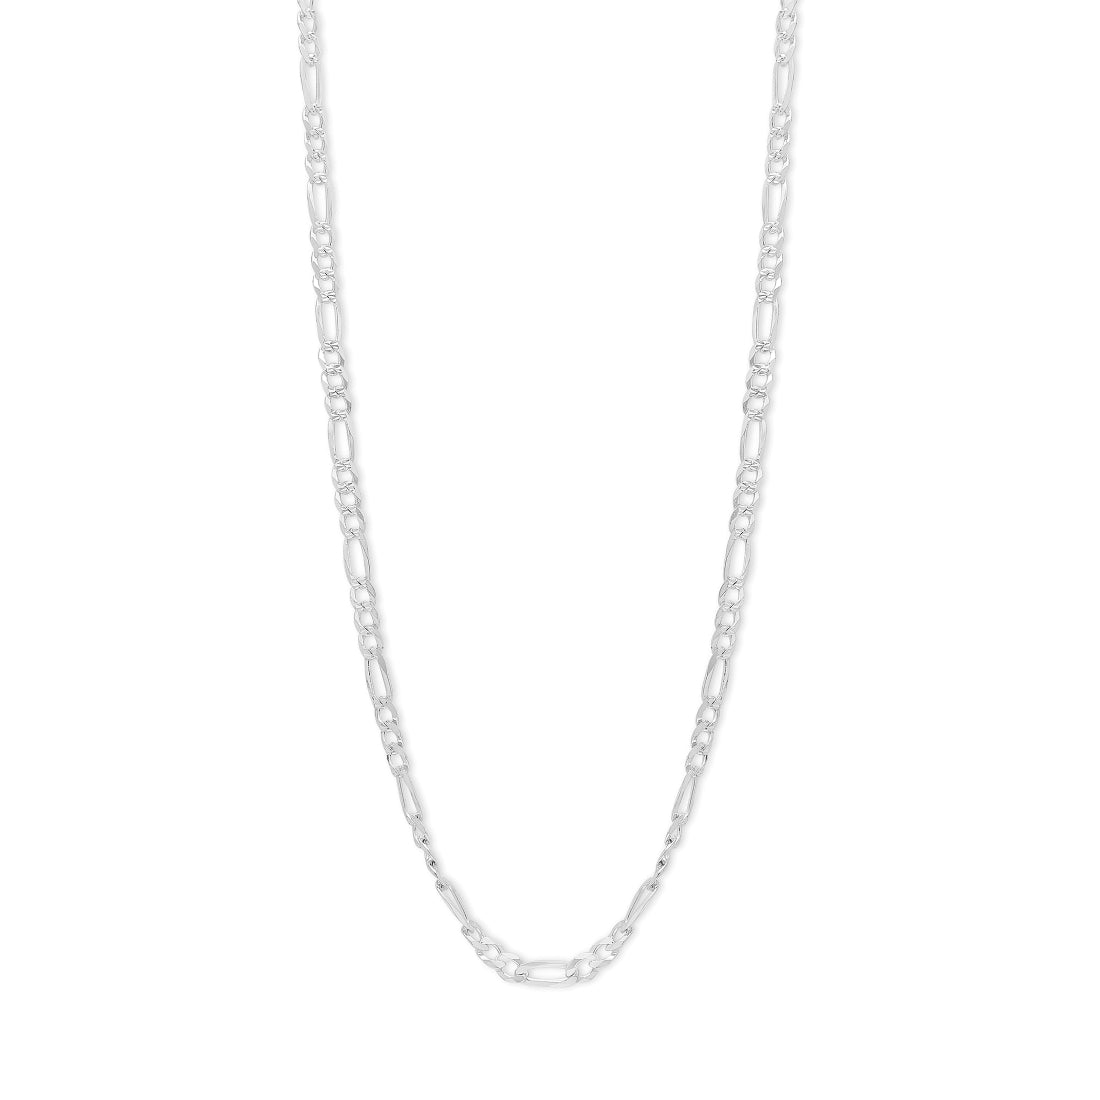 Timeless Links 925 Sterling Silver Linked Chain